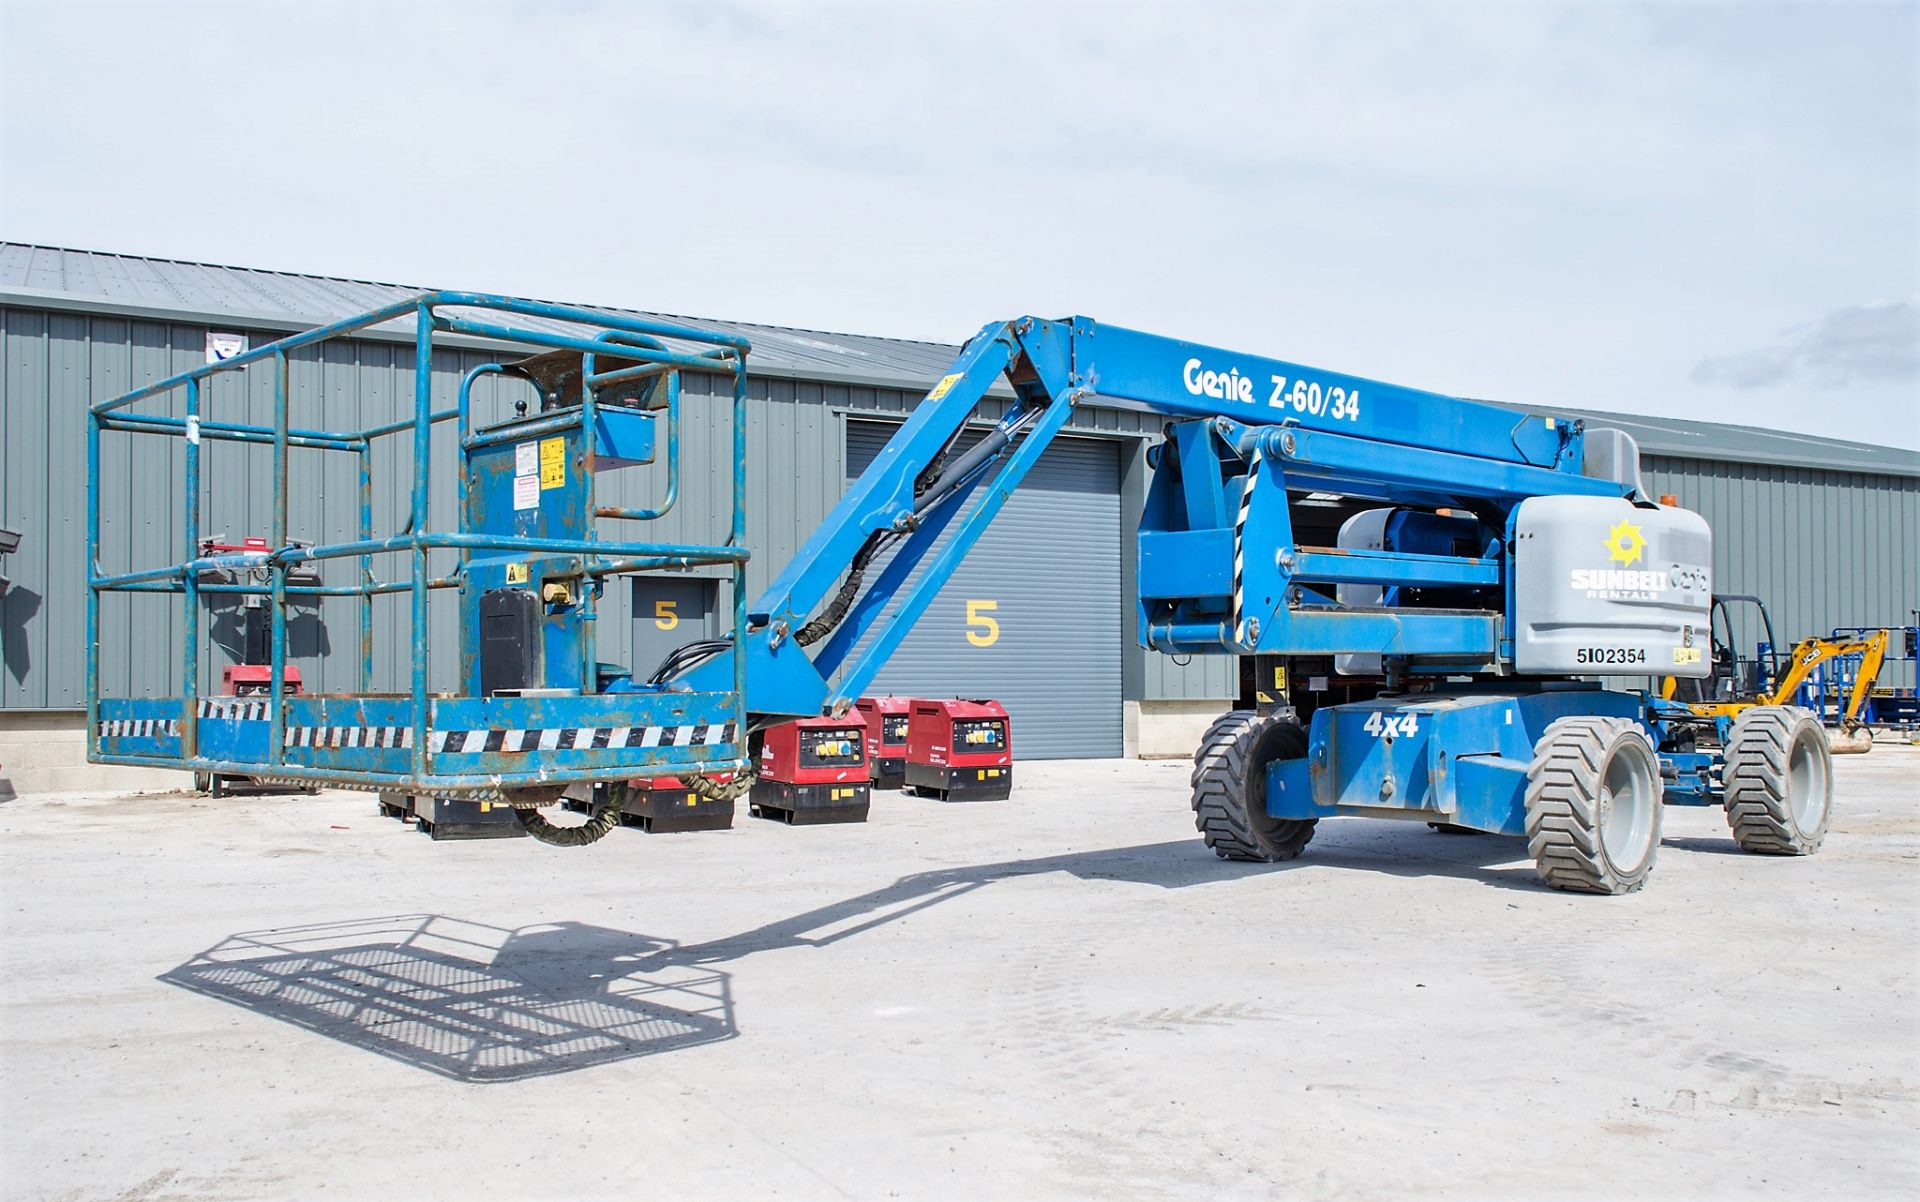 Genie Z60/34 diesel driven articulated boom access platform Year: 2014 S/N: 13399 Recorded Hours: